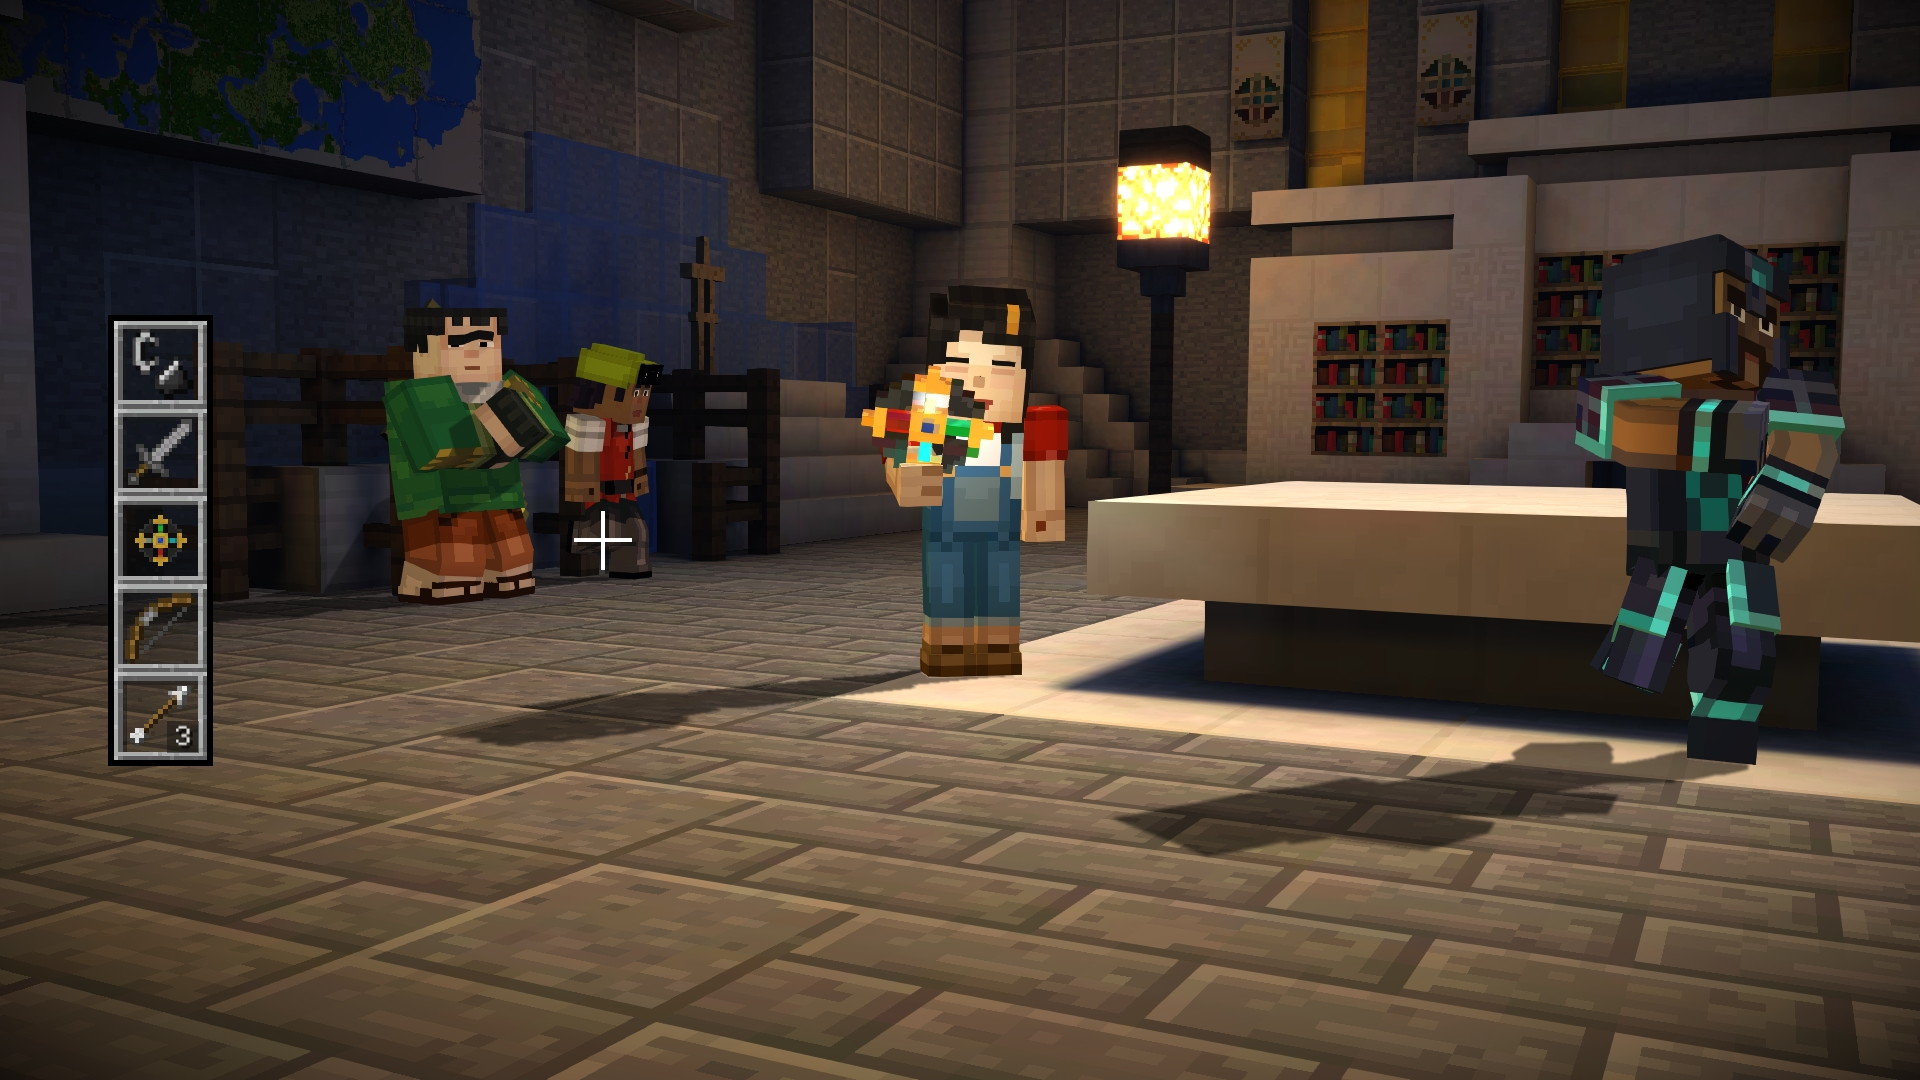 Minecraft: Story Mode - Episode 3: The Last Place You Look - screenshot 11